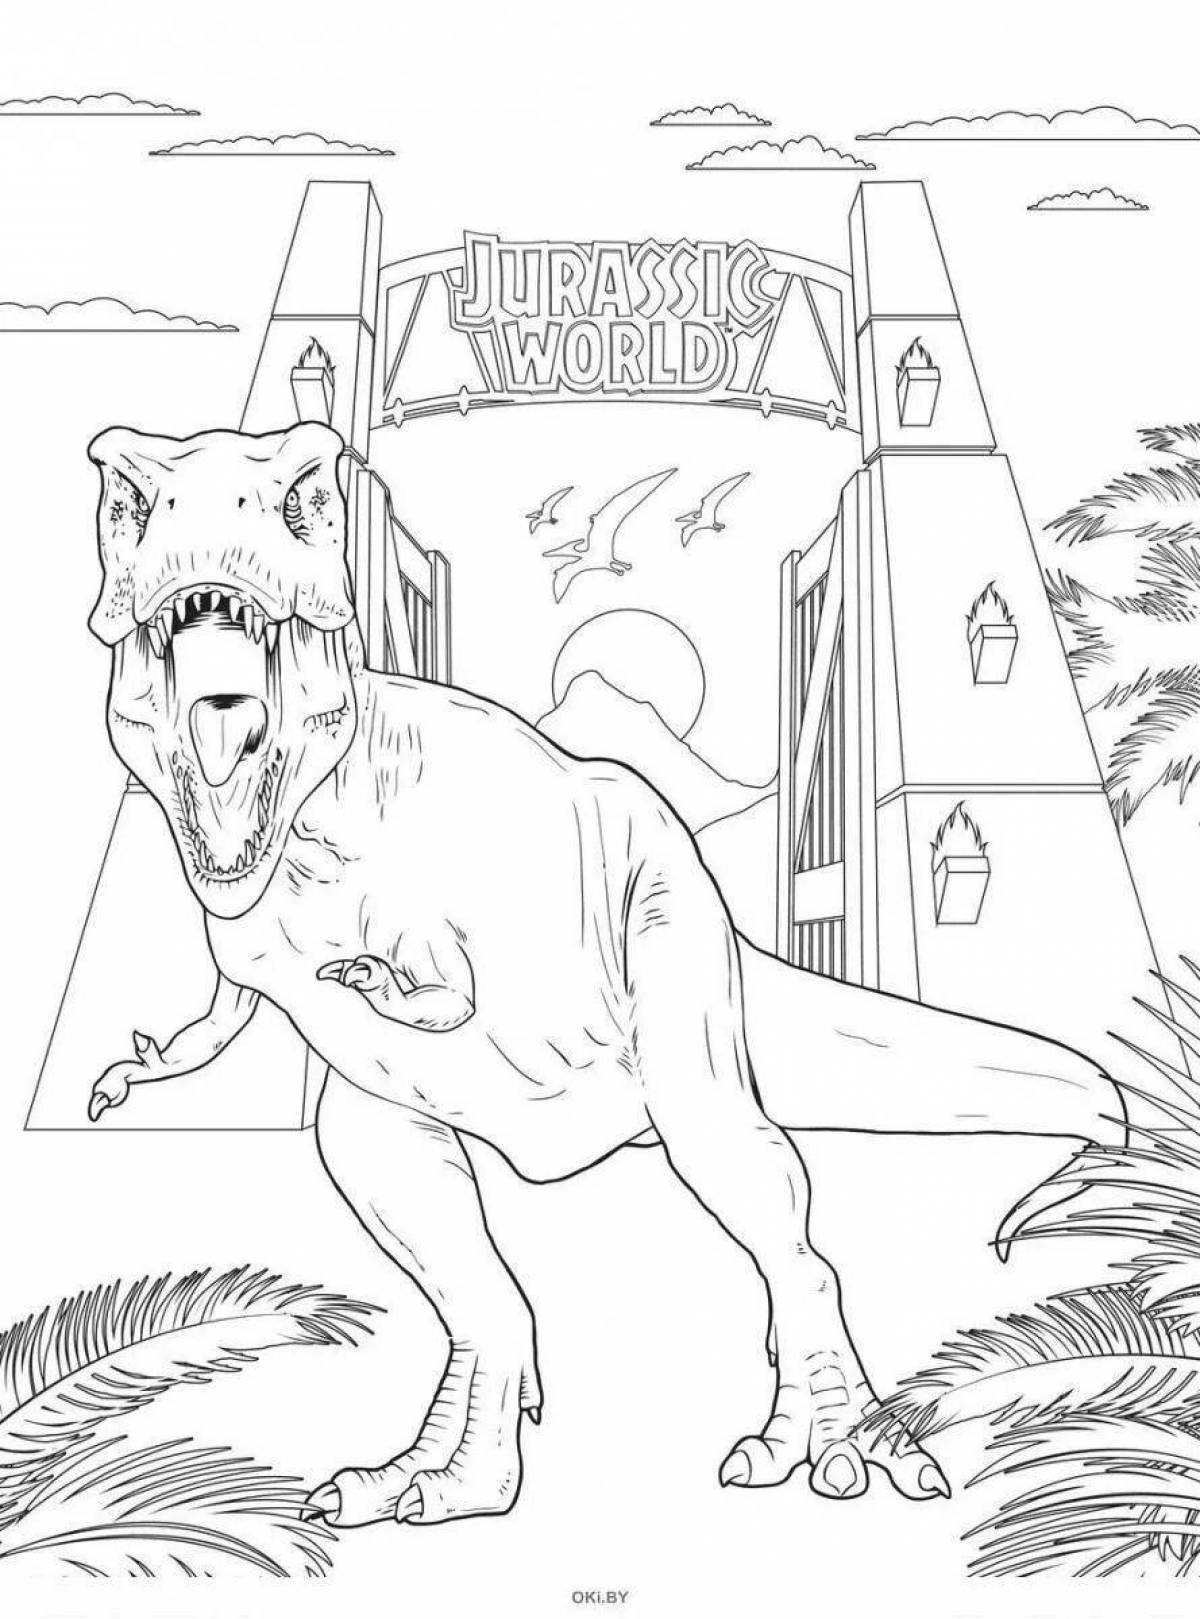 Updated Jurassic world coloring page